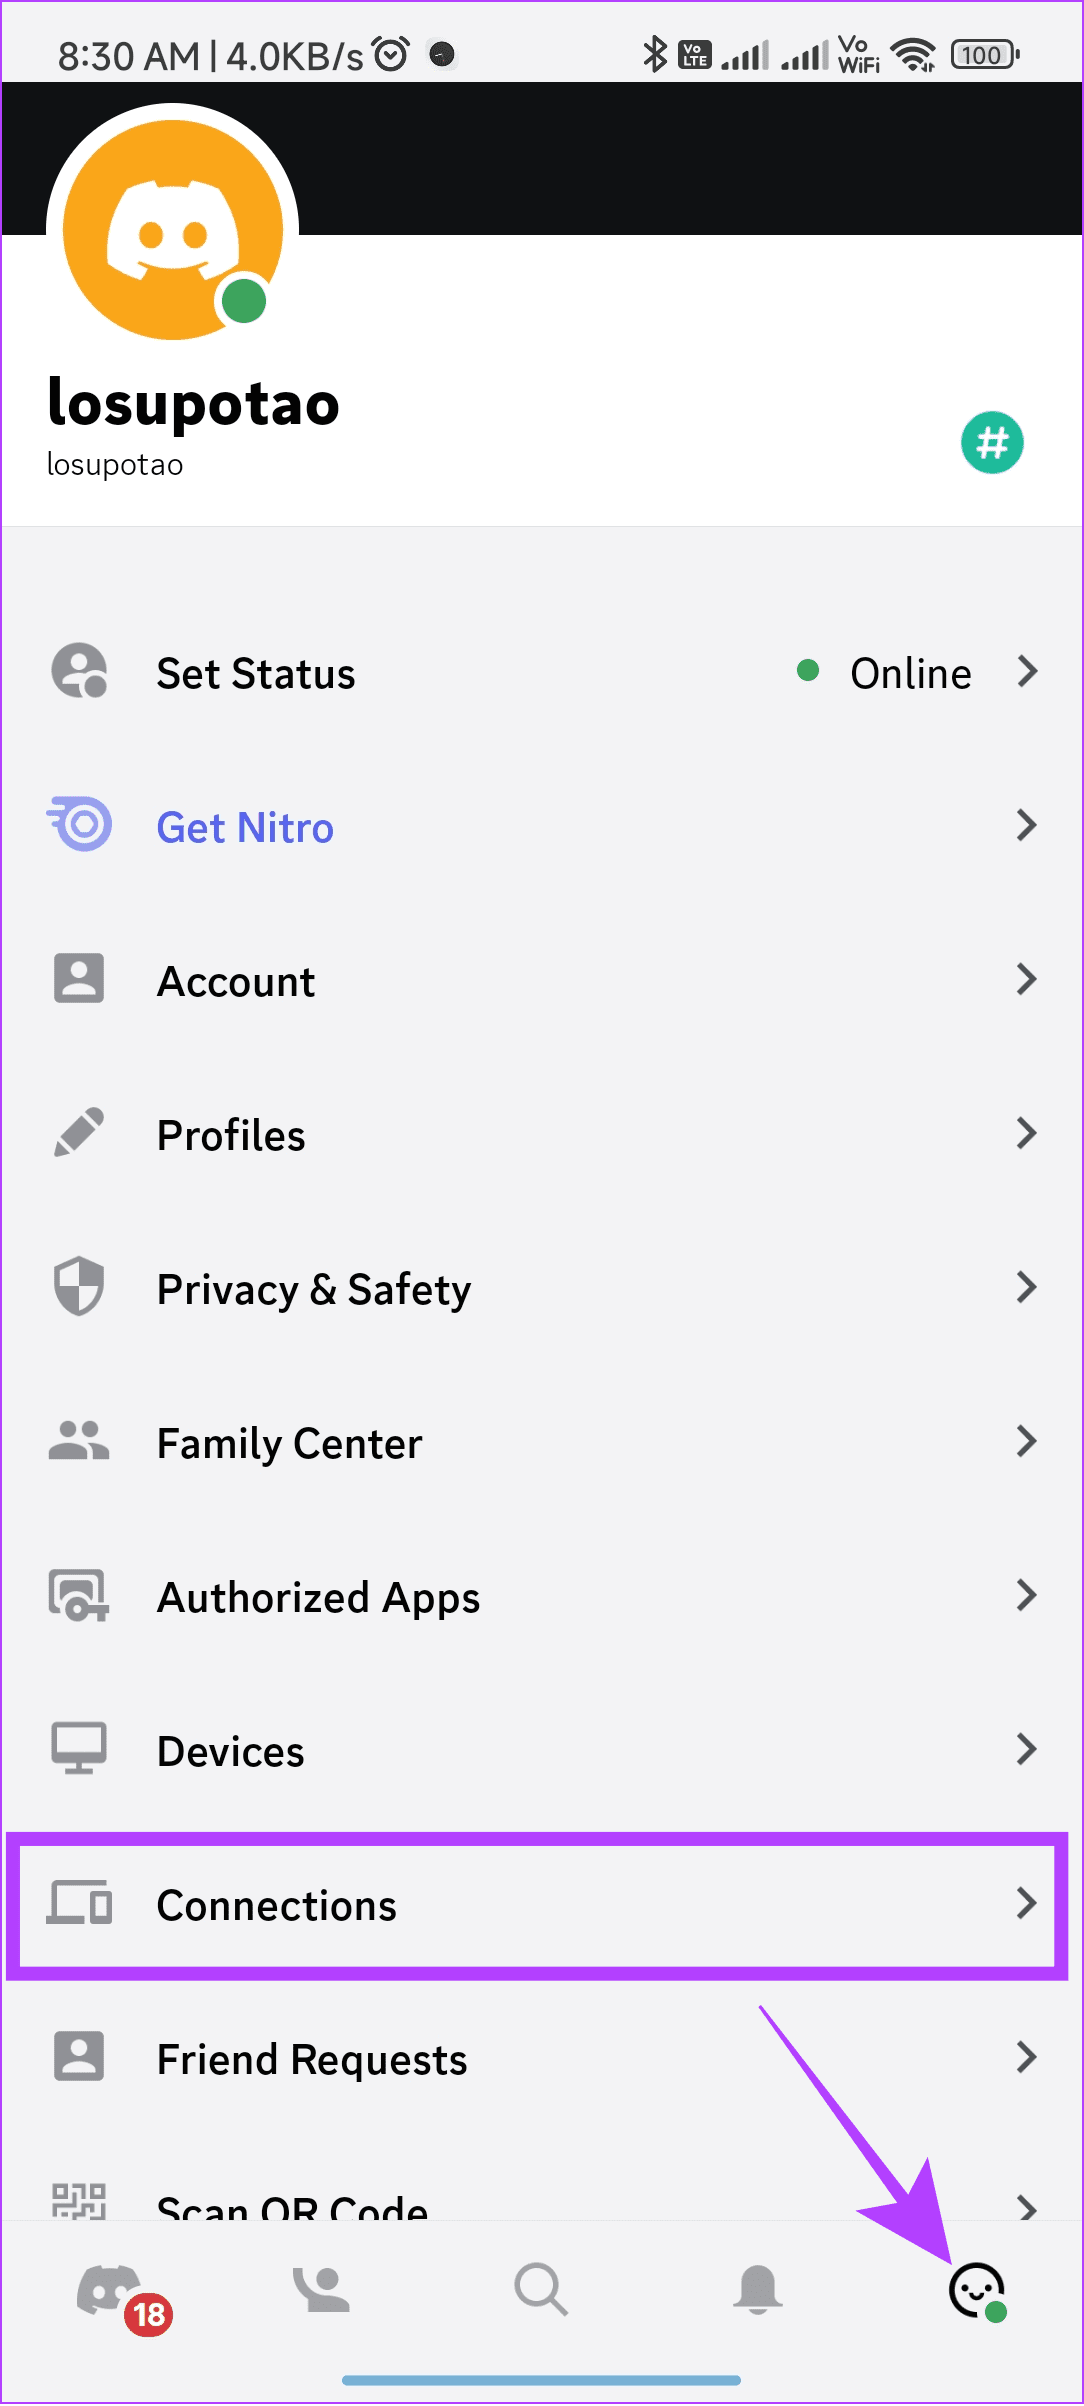 choose profile and then tap connections